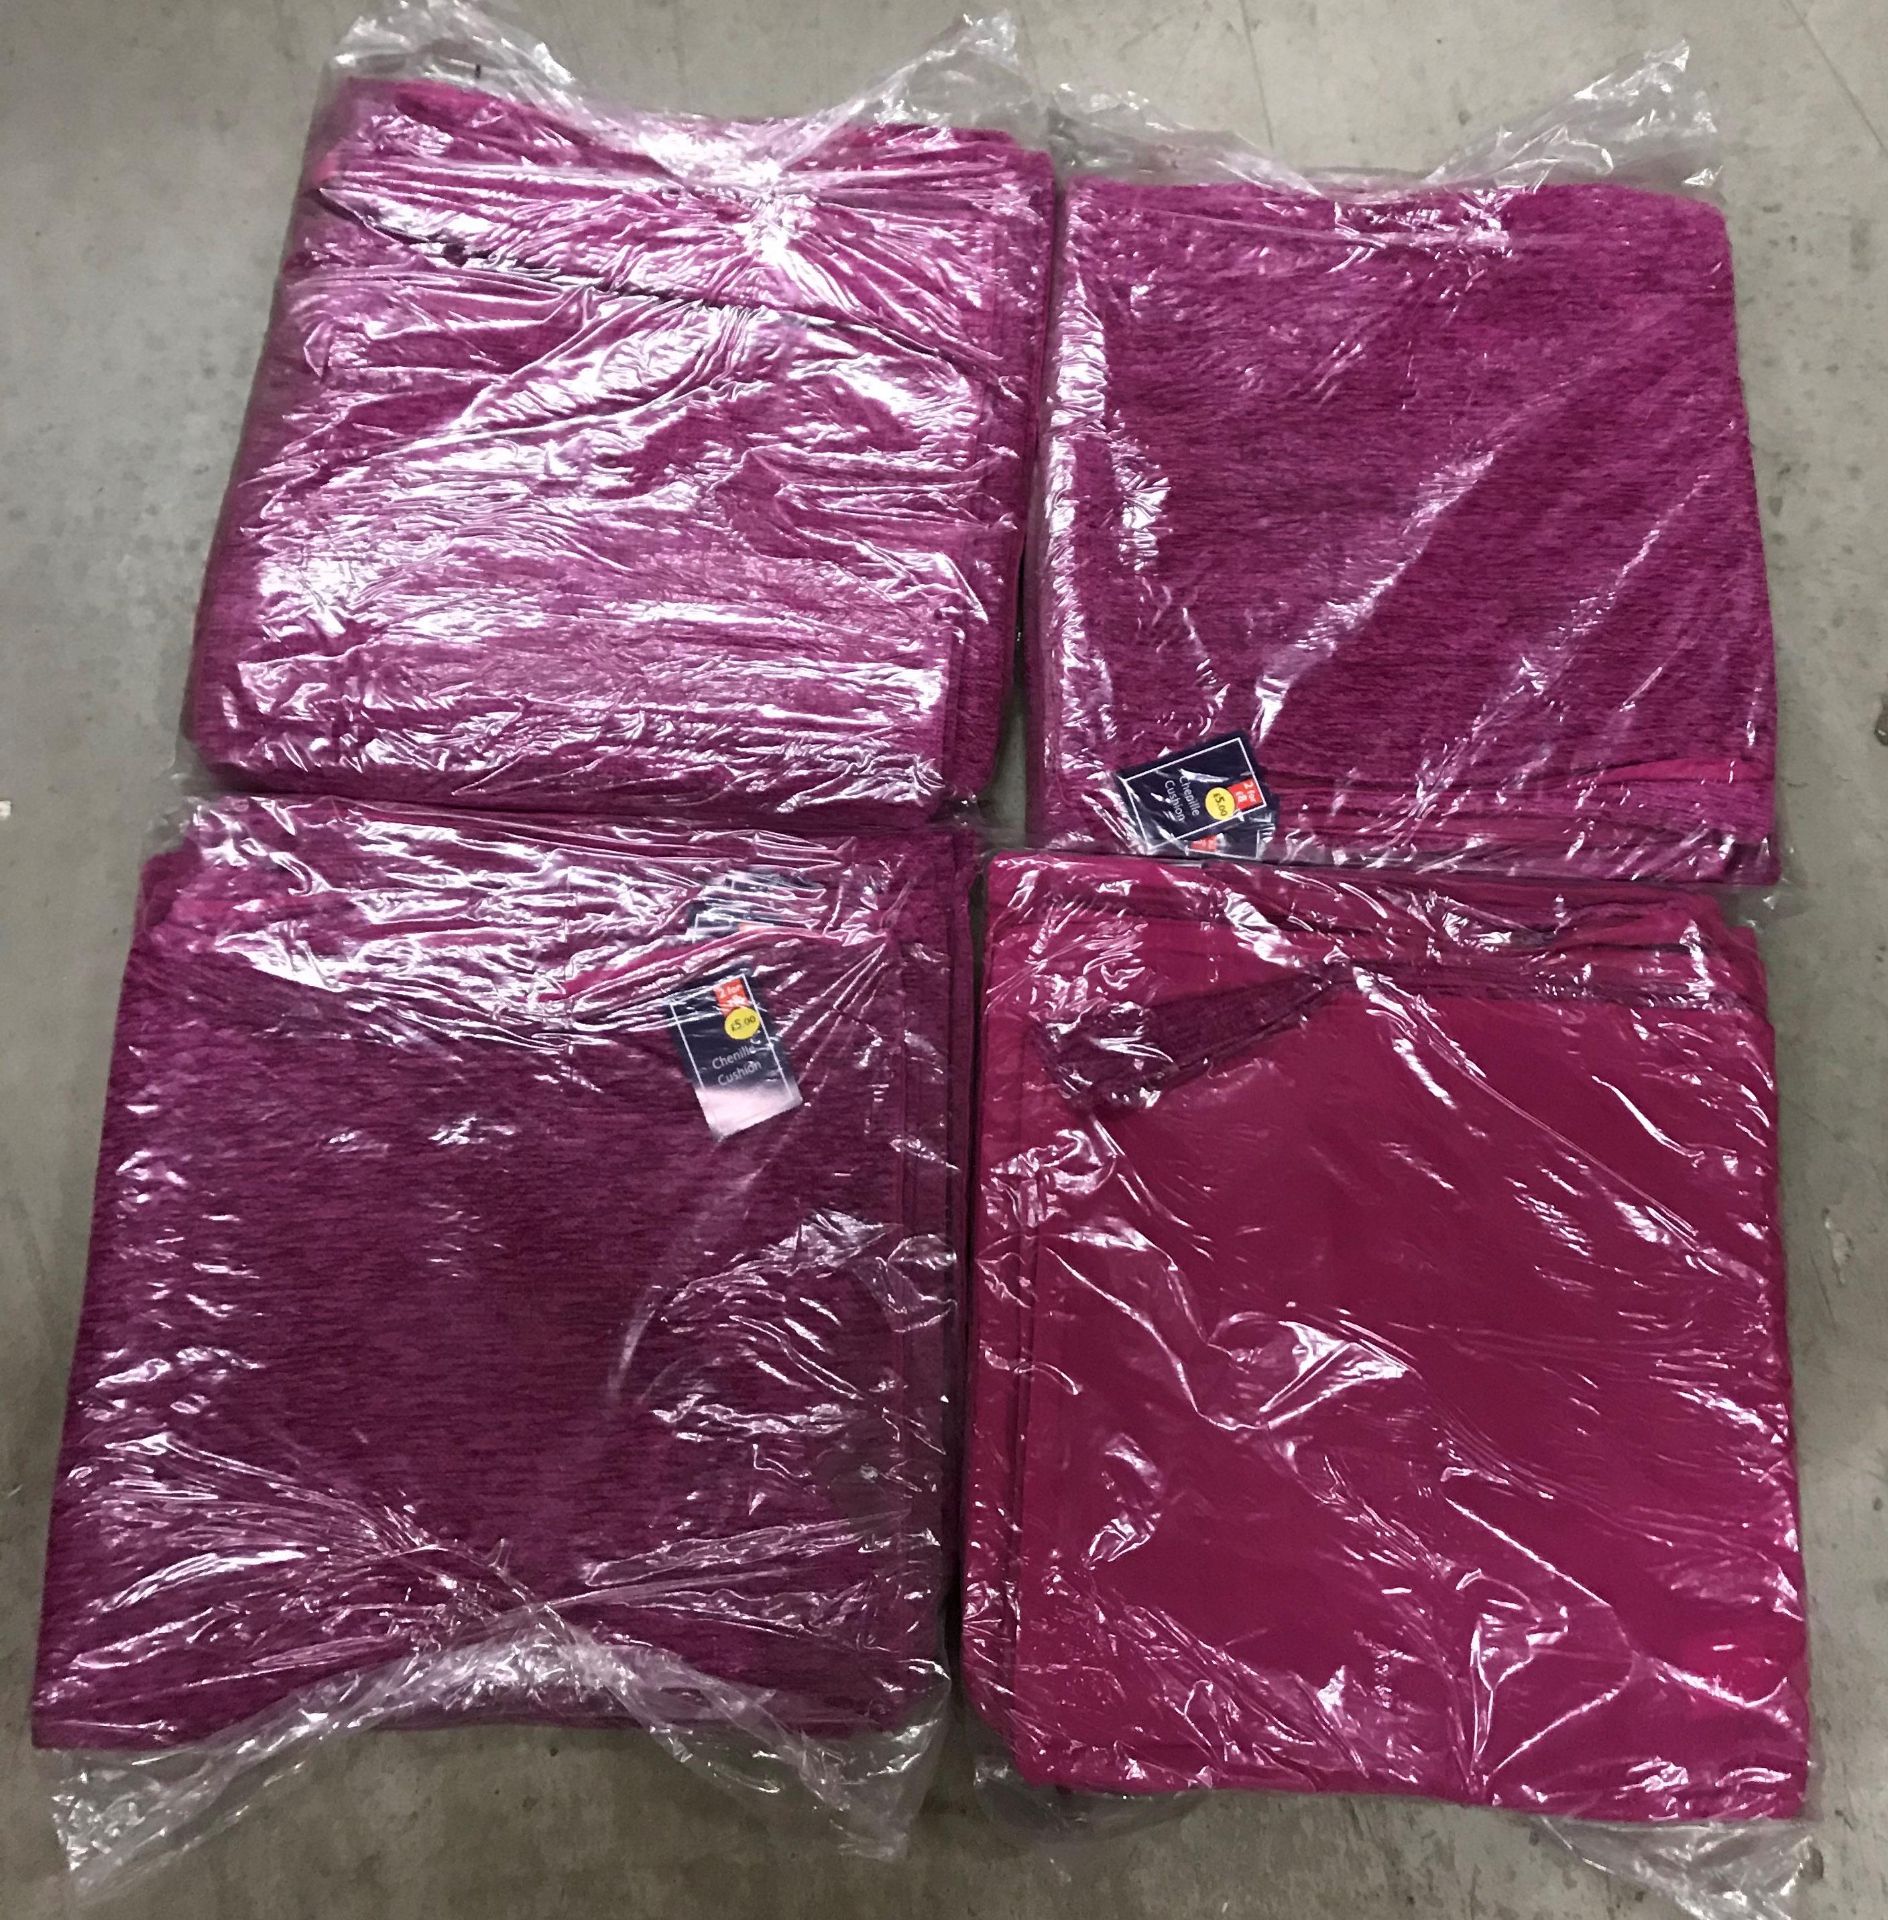 5 x packs of 8 chenille cushion covers in plum - 40 x 40cm - Image 2 of 3